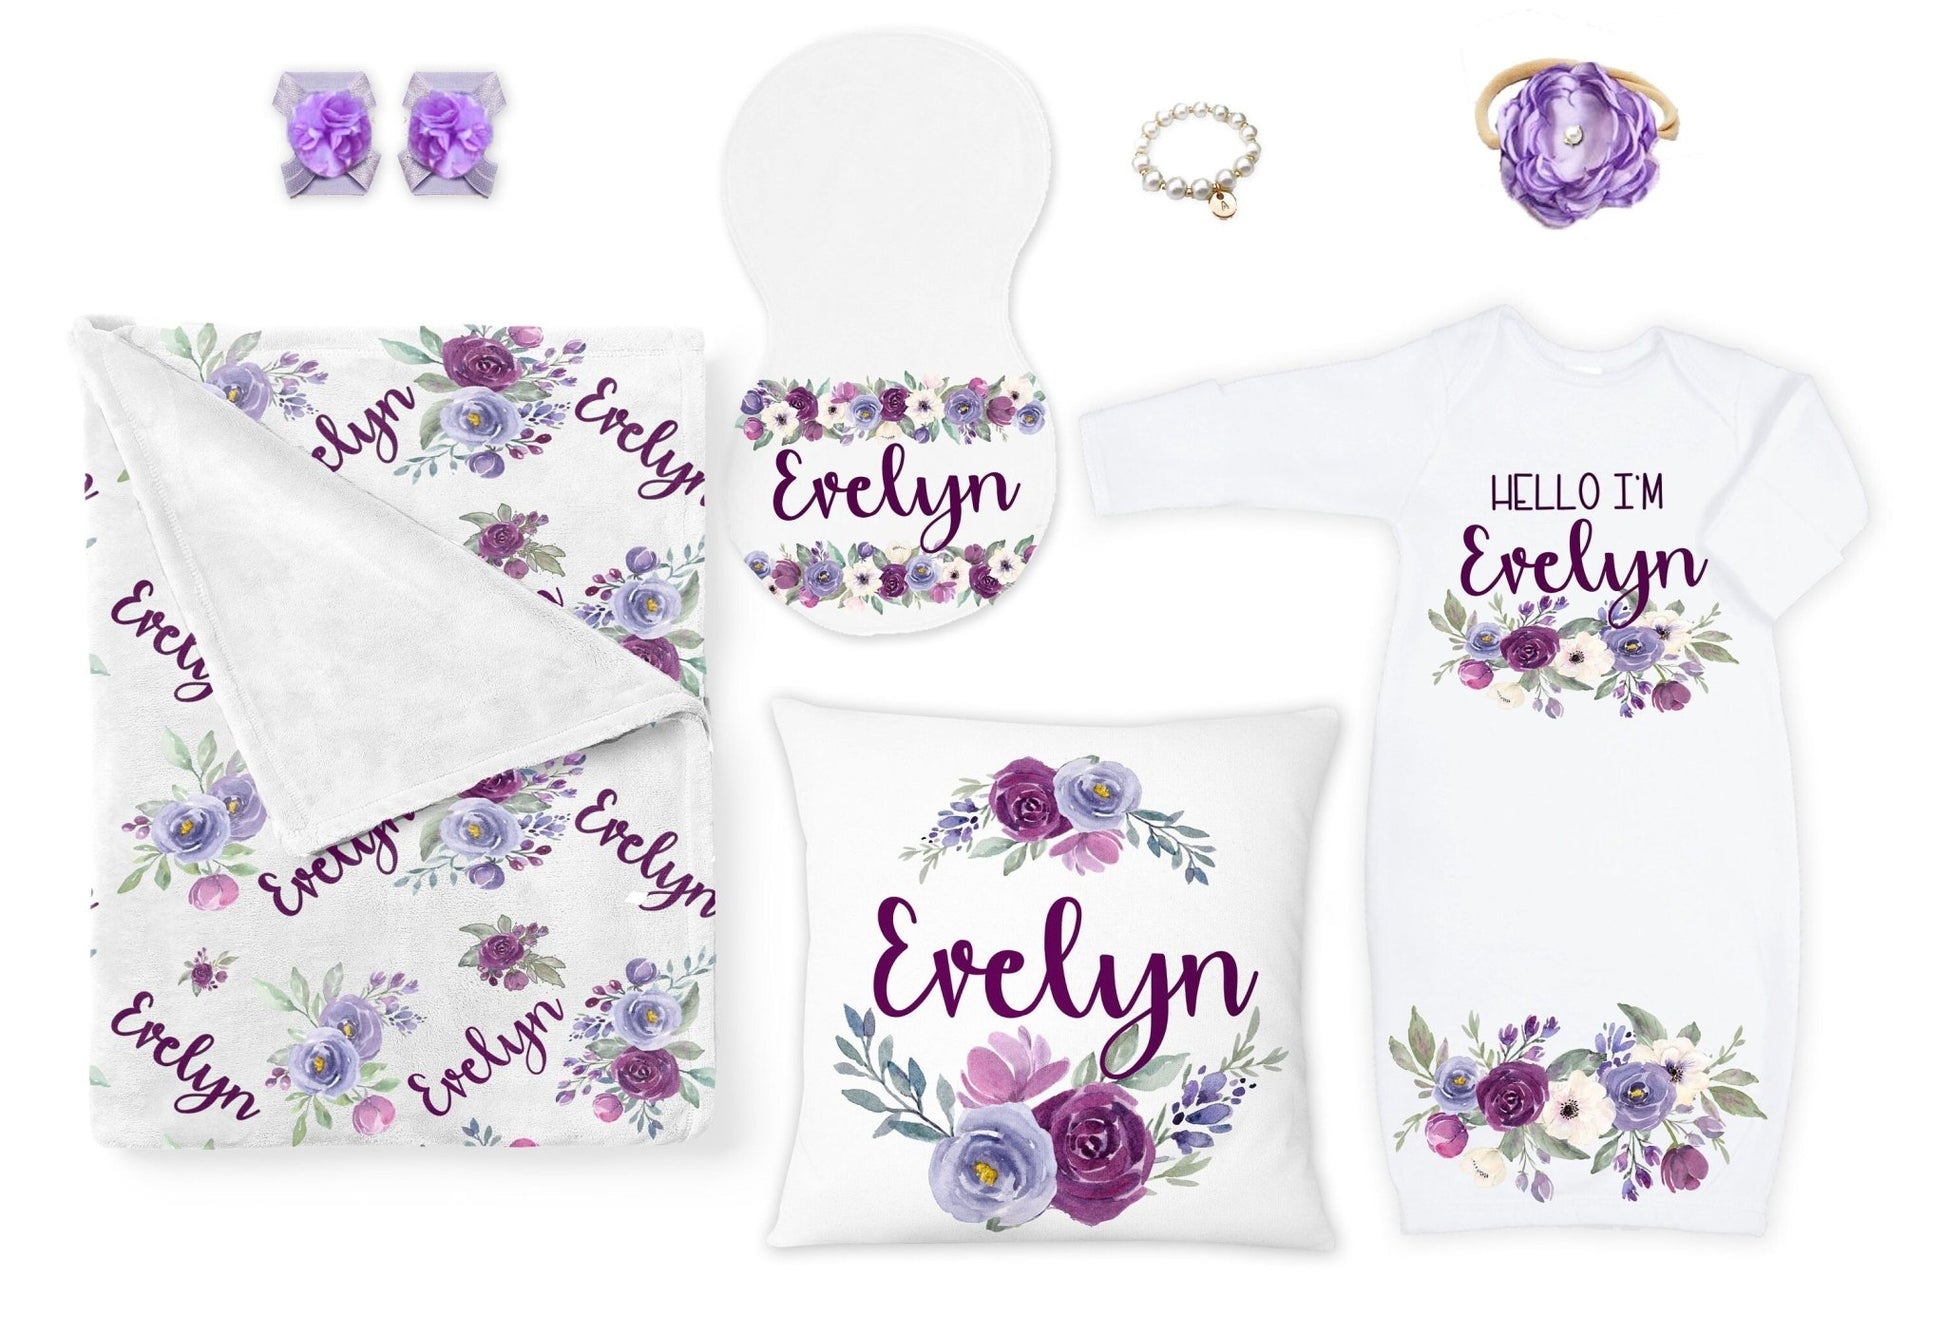 Purple Baby Girl Blanket Gift Set Personalized Baby Shower Gift Purple Floral Pillow Blanket Gown Burp Cloth Hat Bracelet Sandals Headband - Squishy Cheeks